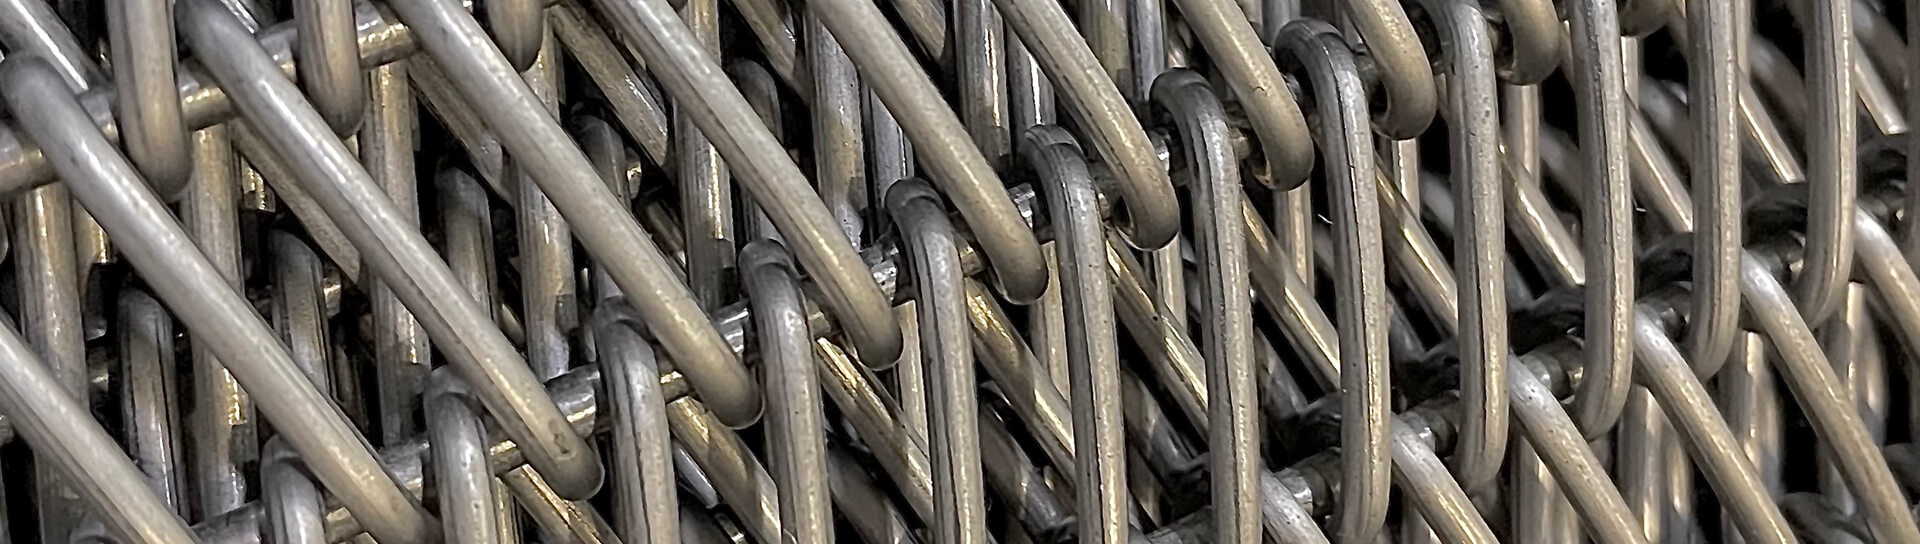 Metal wire intertwined creating background pattern